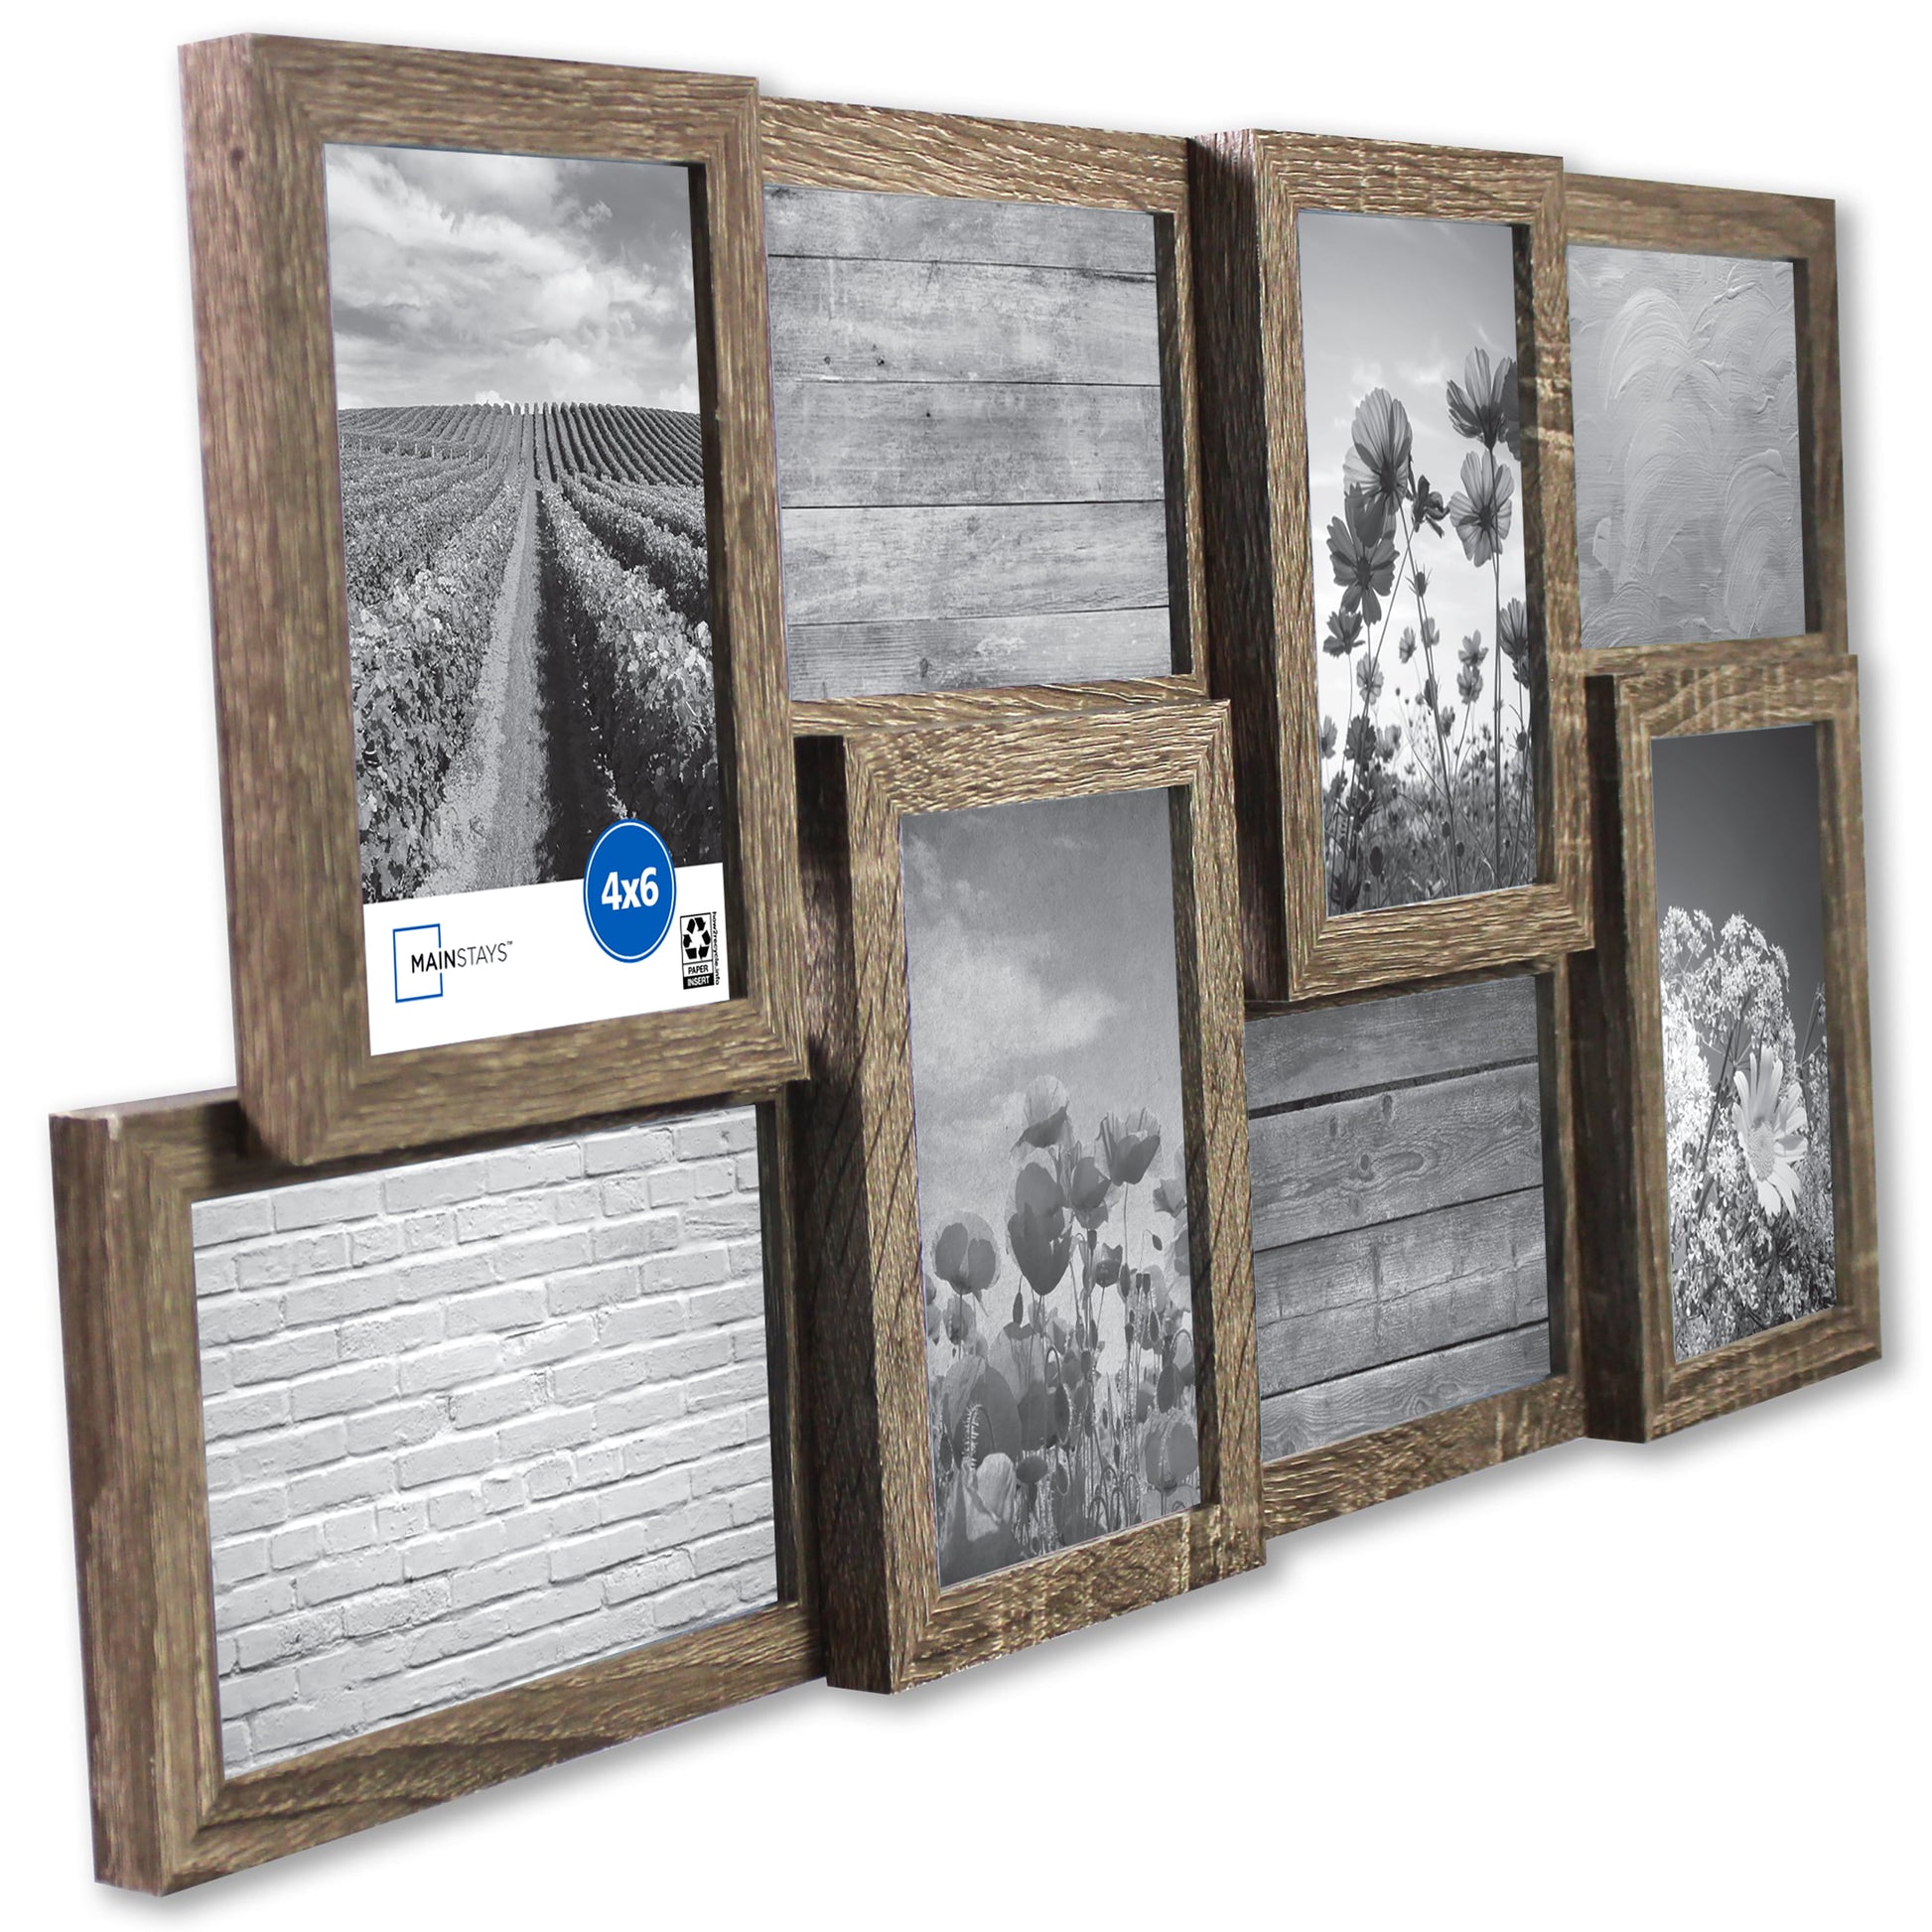 Mainstays 4x6 Rustic White Tabletop Picture Frame 